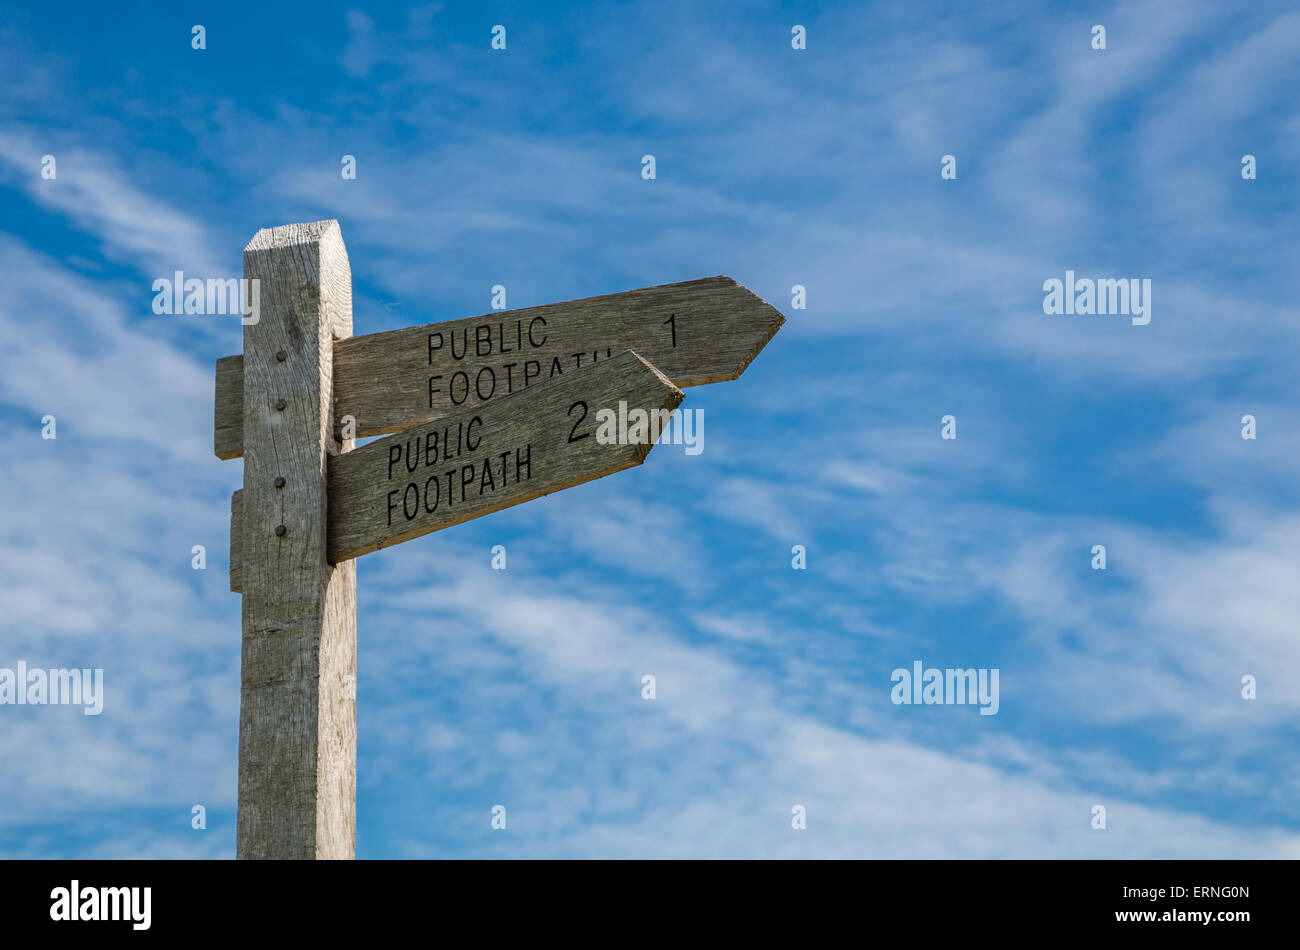 A public footpath signpost against a blue sky Stock Photo